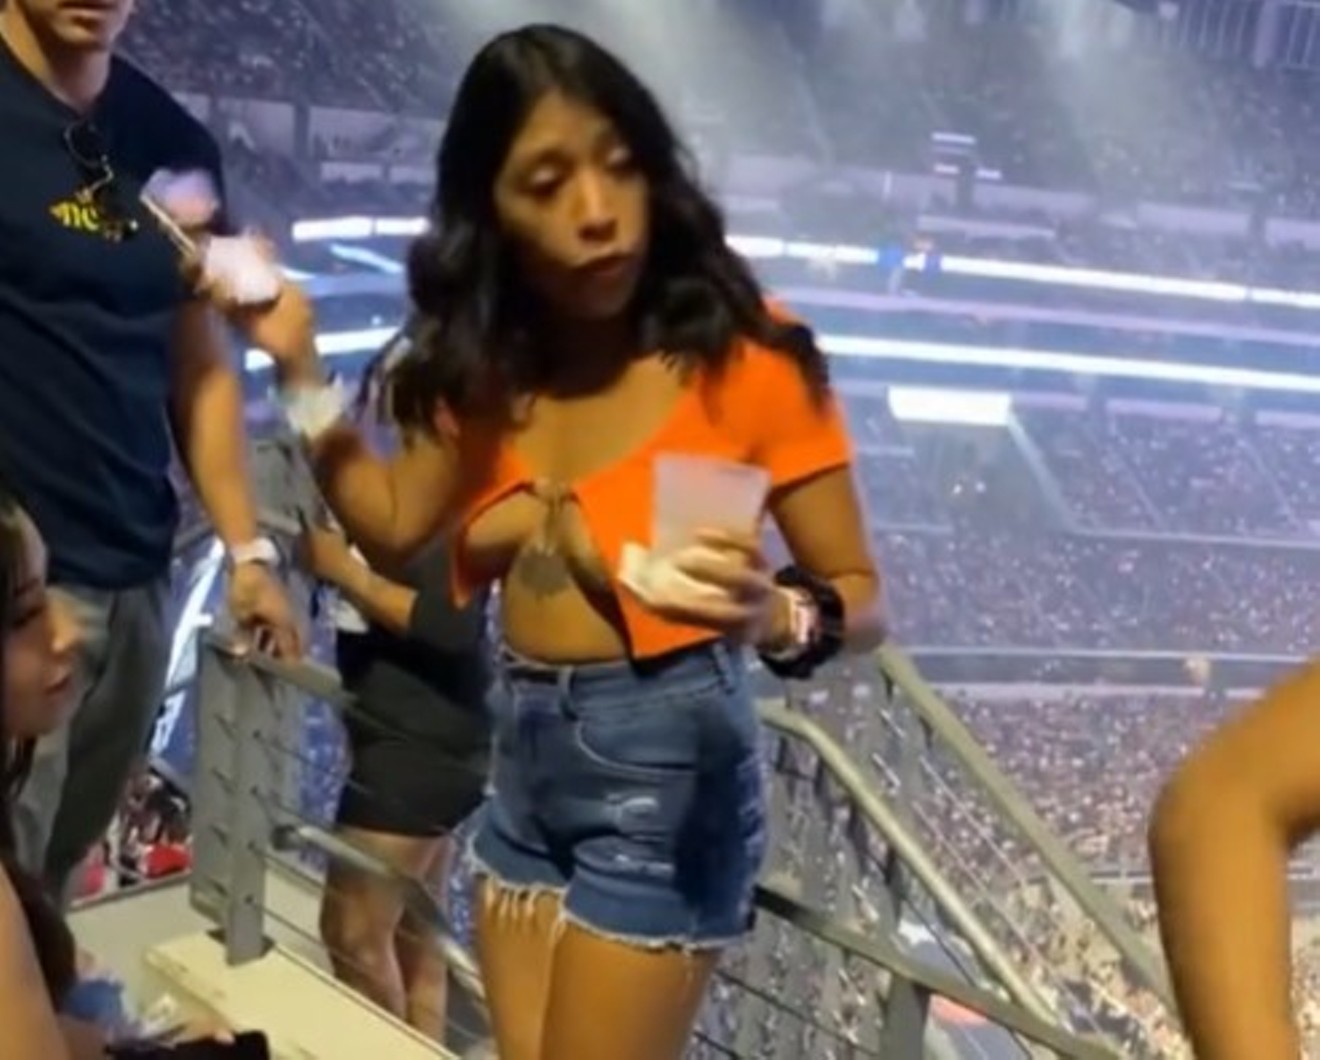 An unidentified woman gets a group of friends to leave her assigned seats before the Bad Bunny show at AT&T Stadium.